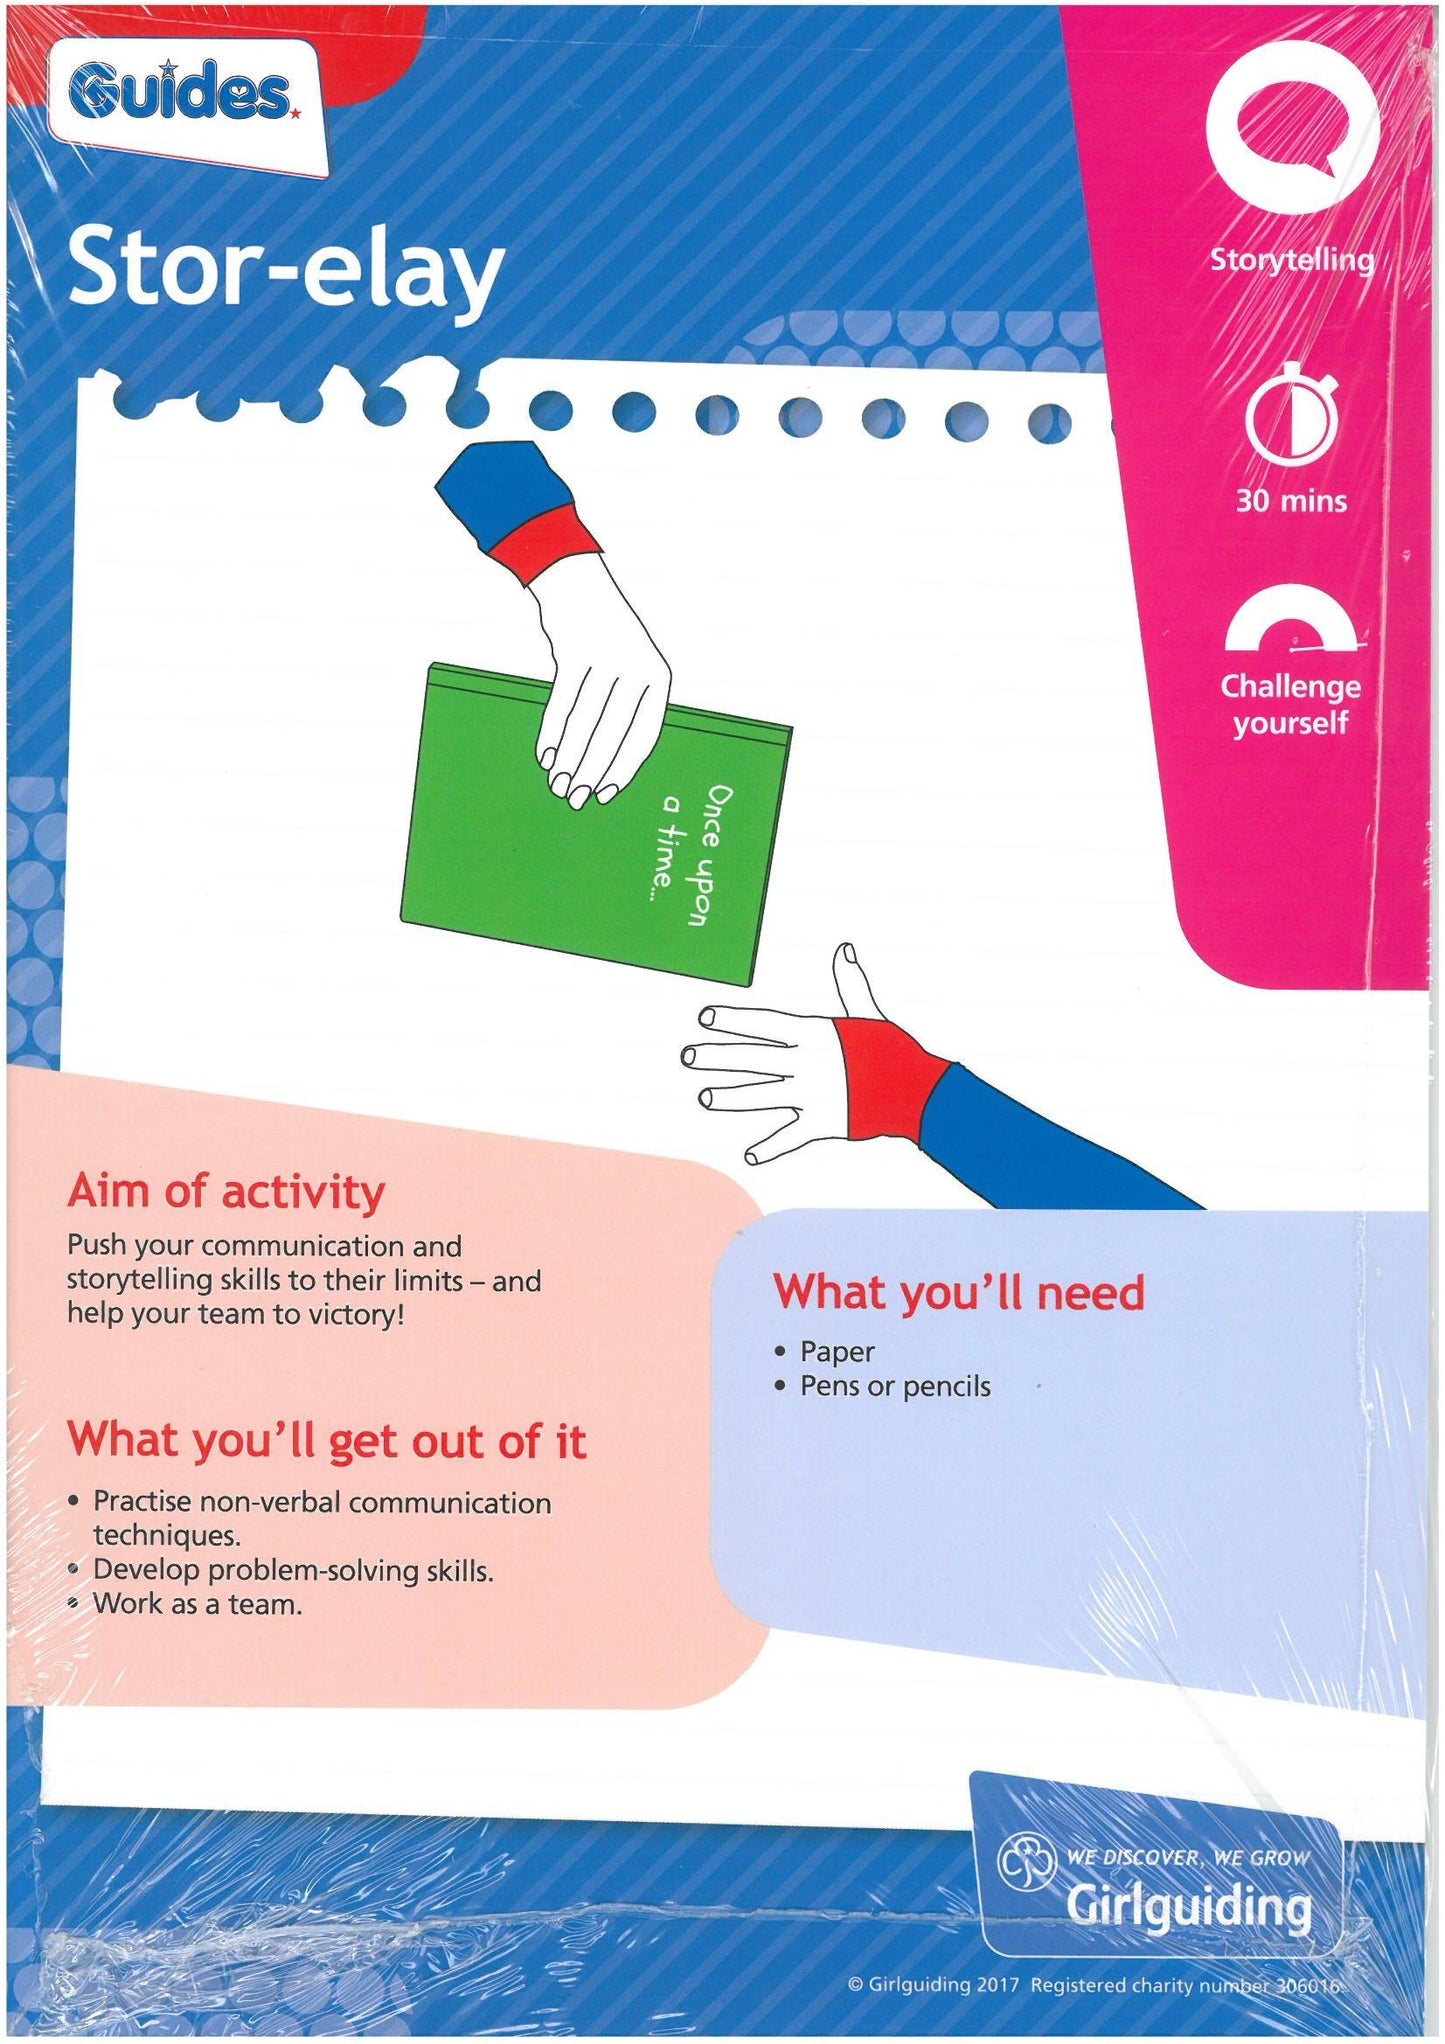 Guides - Unit Meeting Activity Pack 2 - Stor-elay/Pass It On